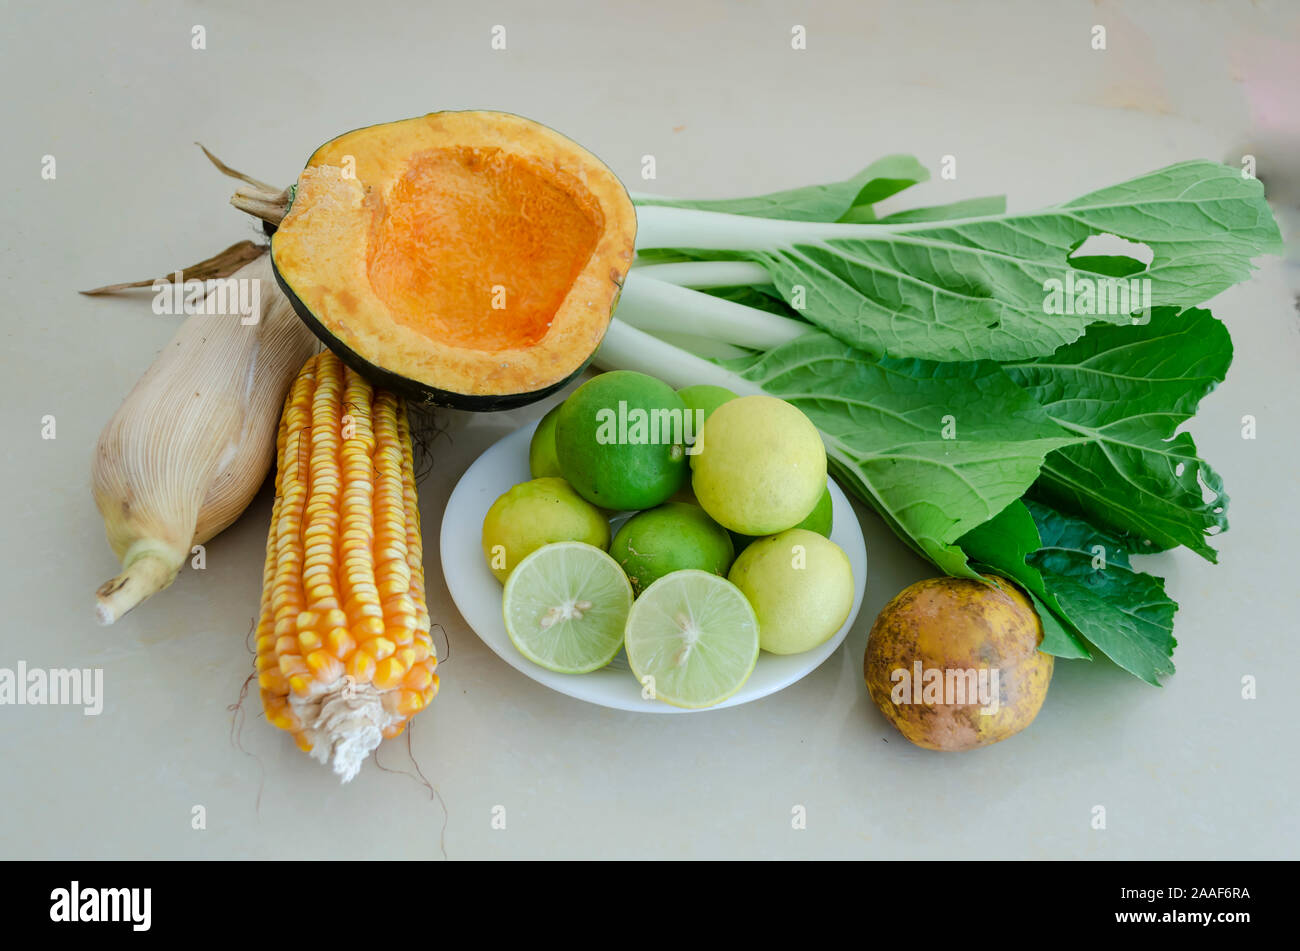 Fruits, Vegetables, And Grains Stock Photo